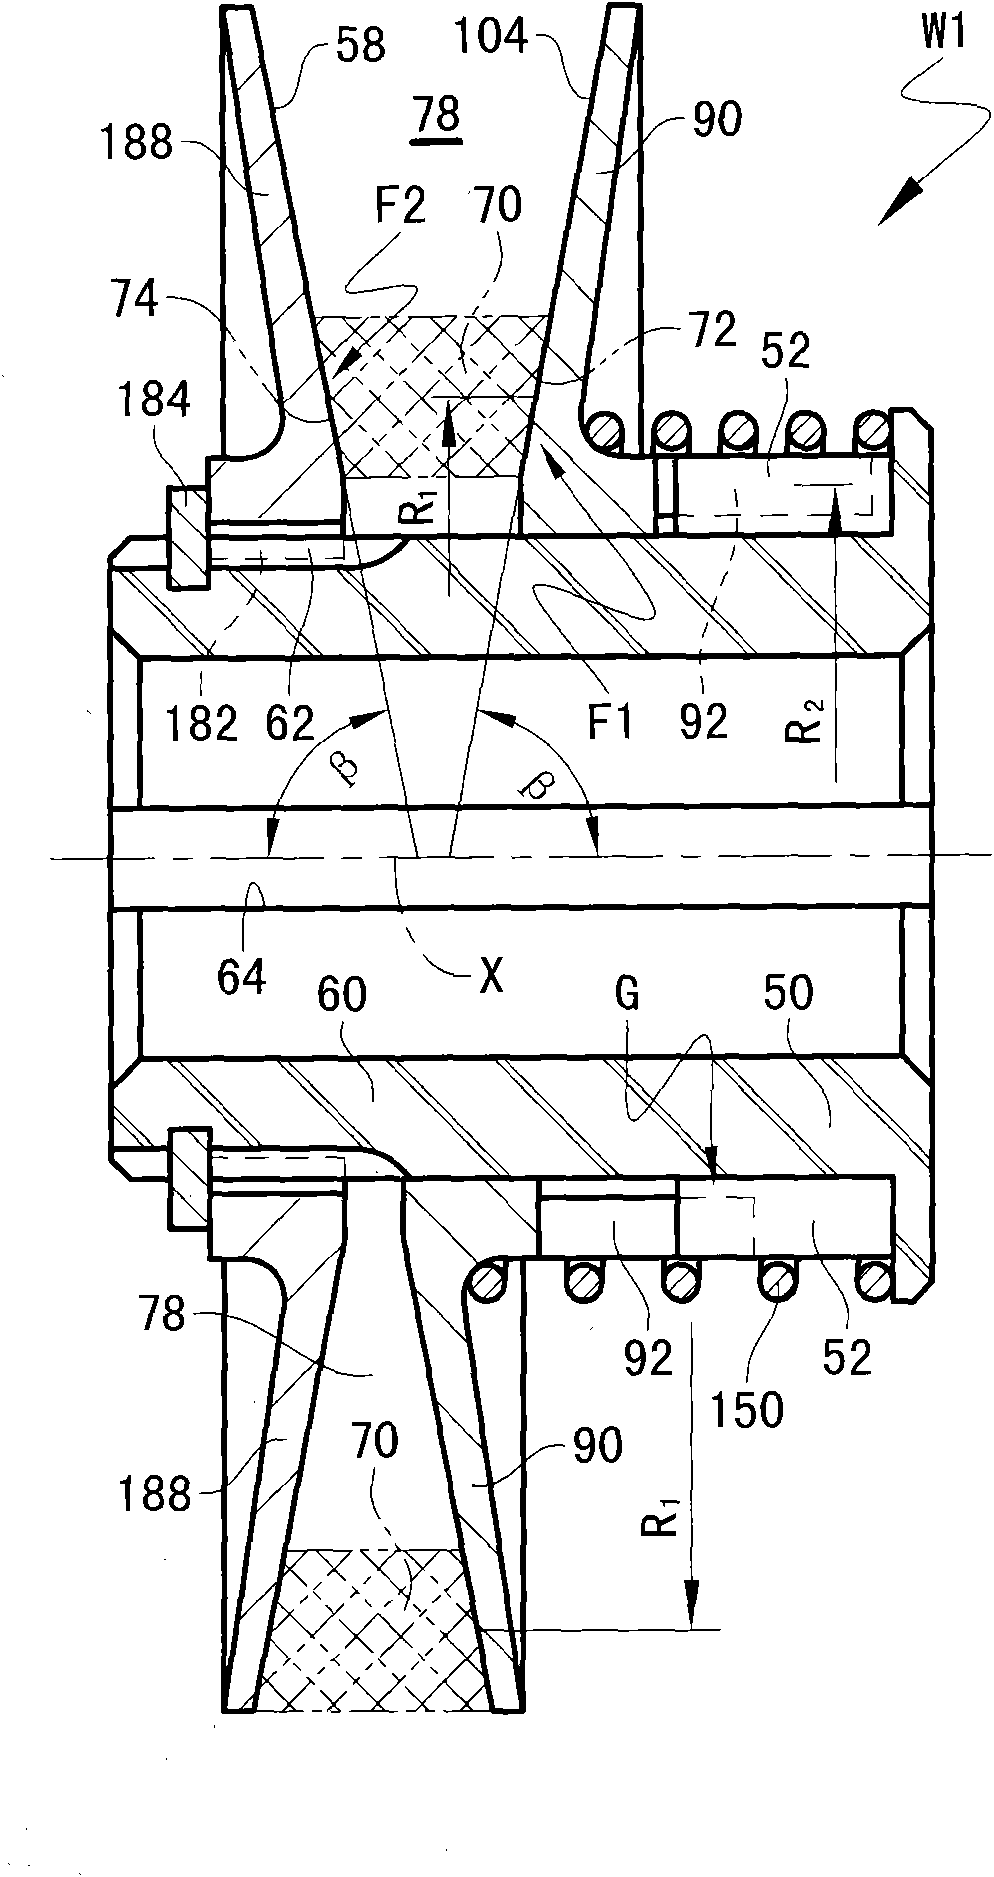 Space-wedged-type pressurizing mechanism and combined-type friction transmission wheel with same